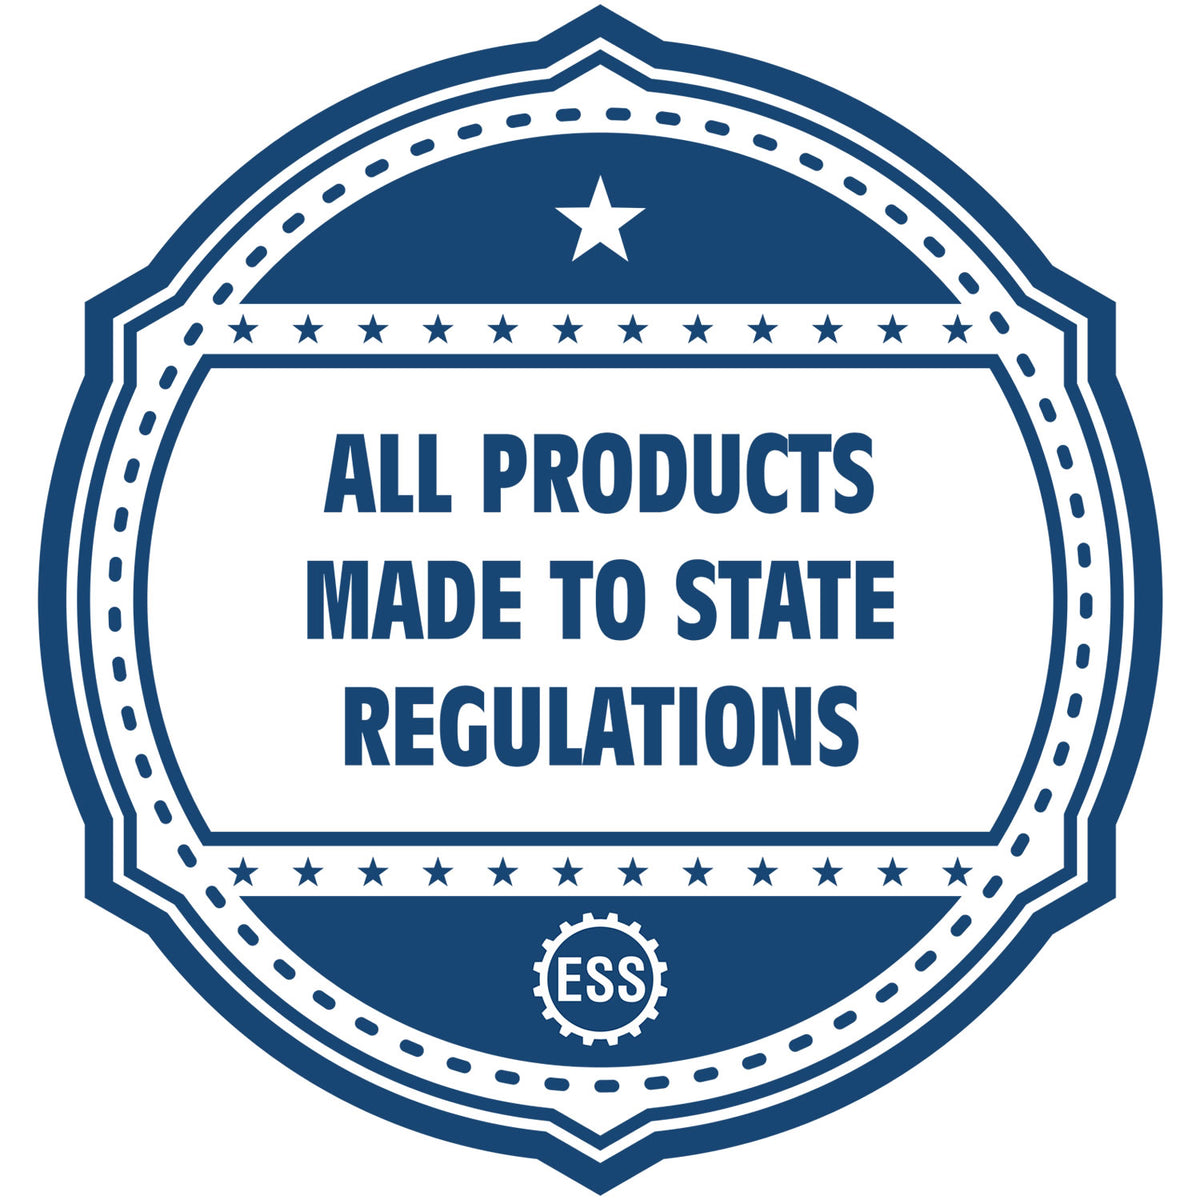 An icon or badge element for the Slim Pre-Inked Rectangular Notary Stamp for Colorado showing that this product is made in compliance with state regulations.